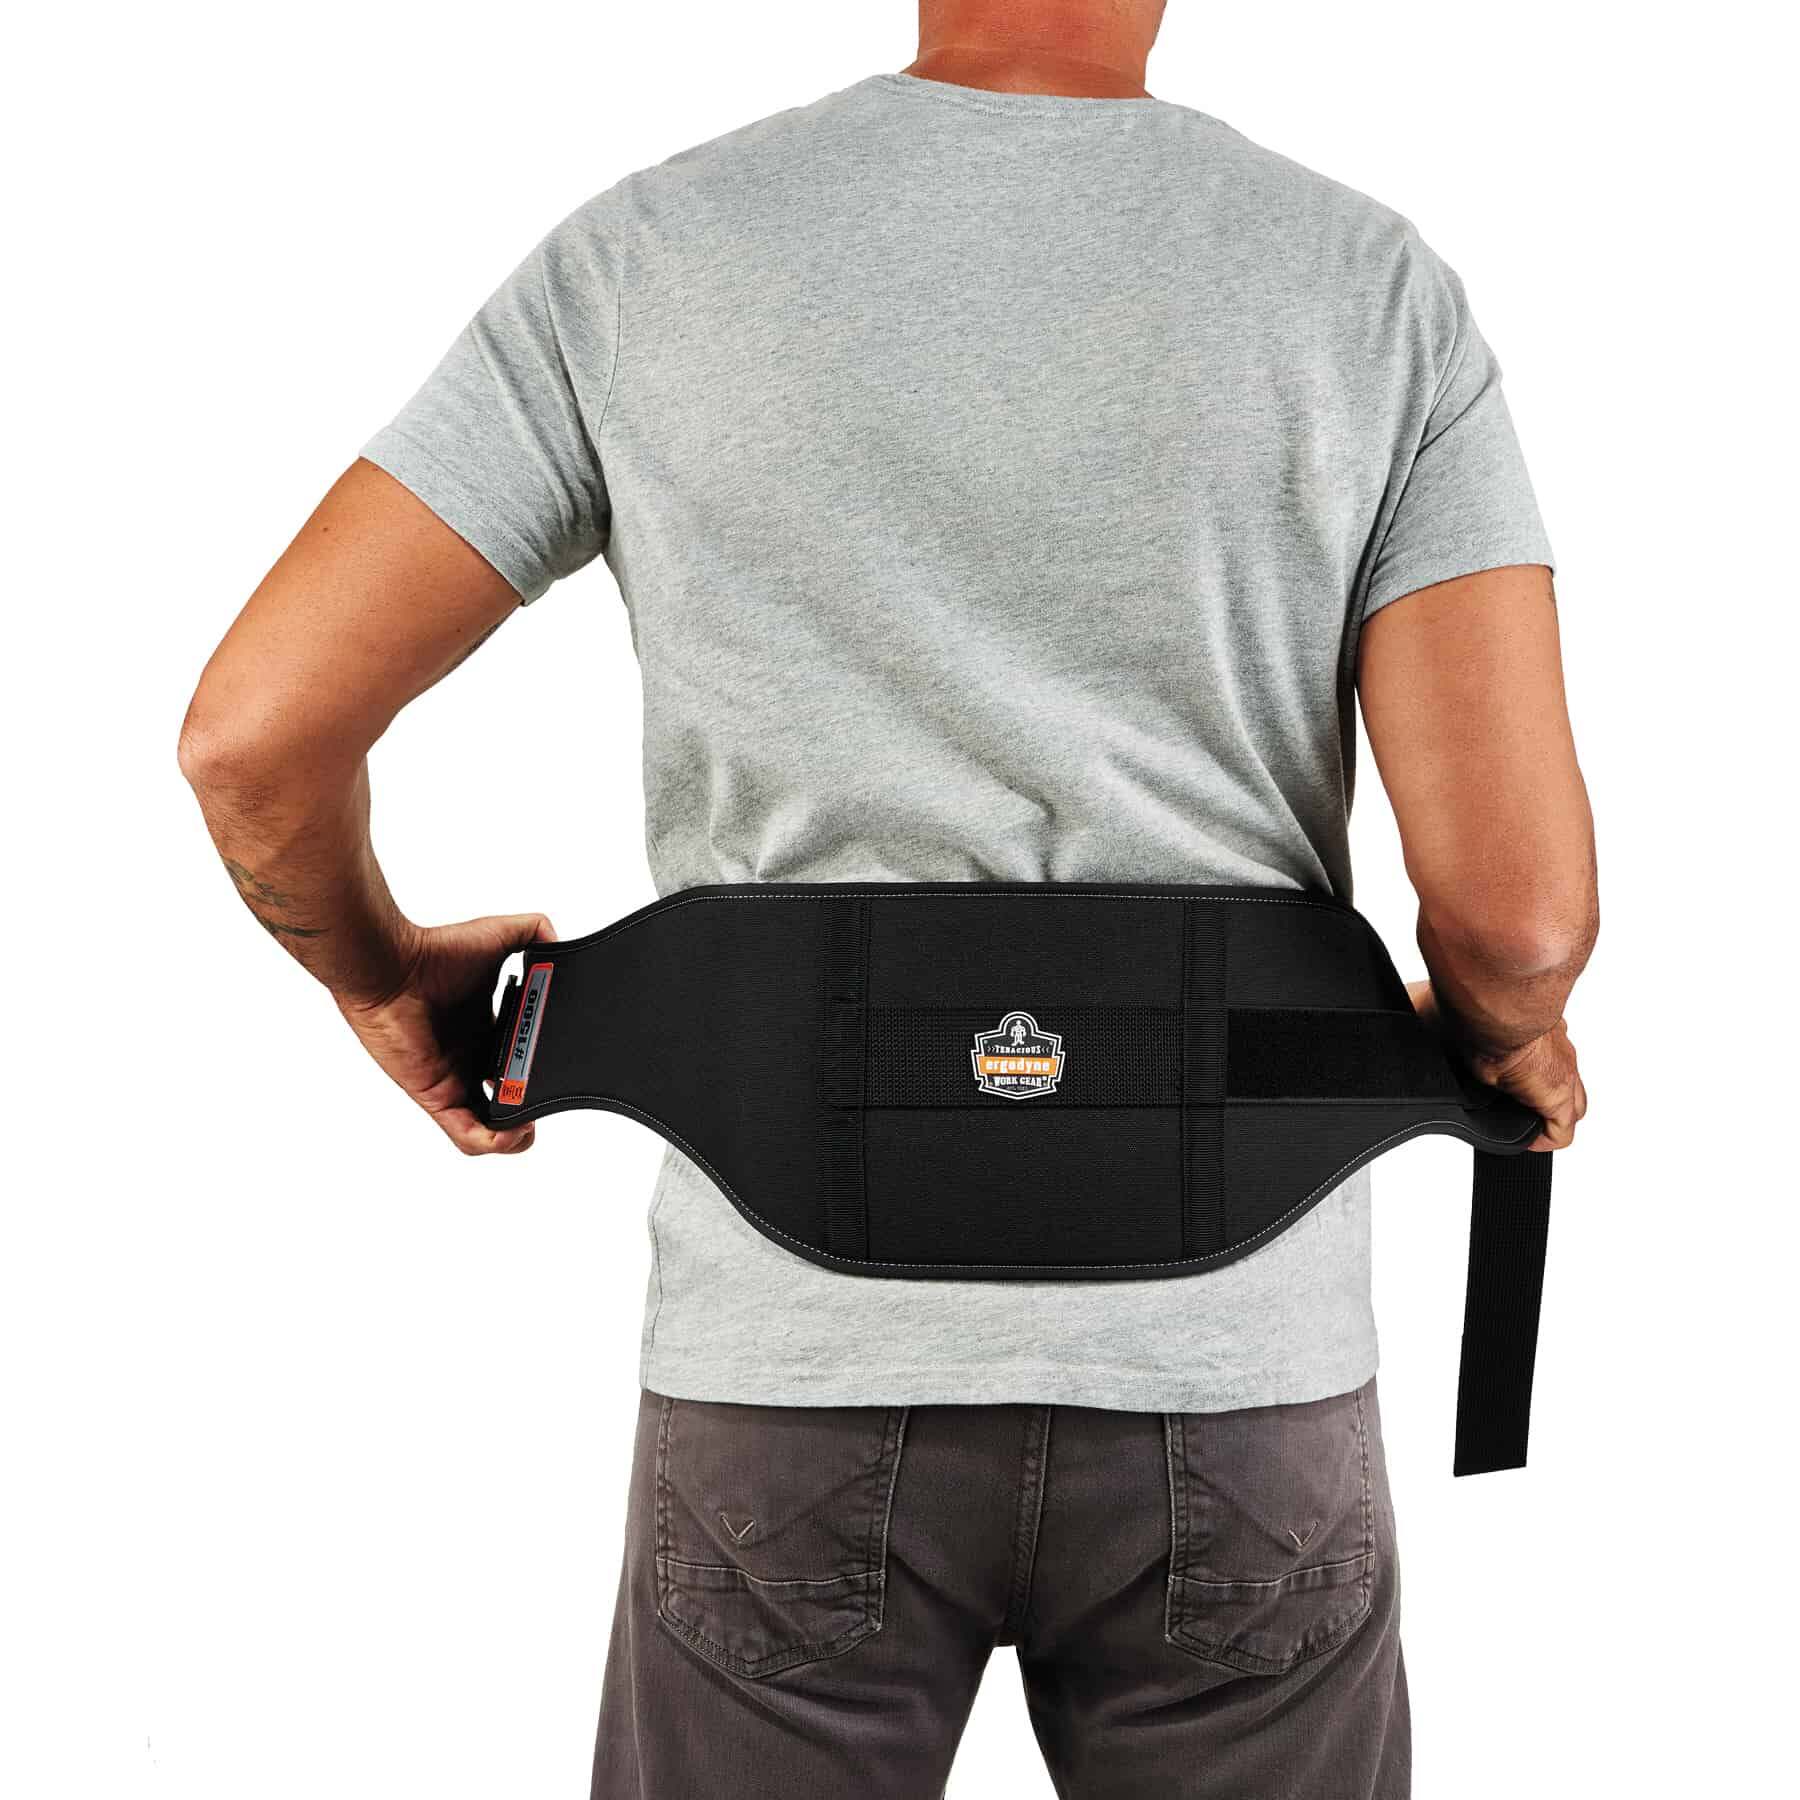 Women Weight Lifting Belt - High Performance Neoprene Back Support - Light  Weight & Heavy Duty Core Support For WeightLifting and Fitness